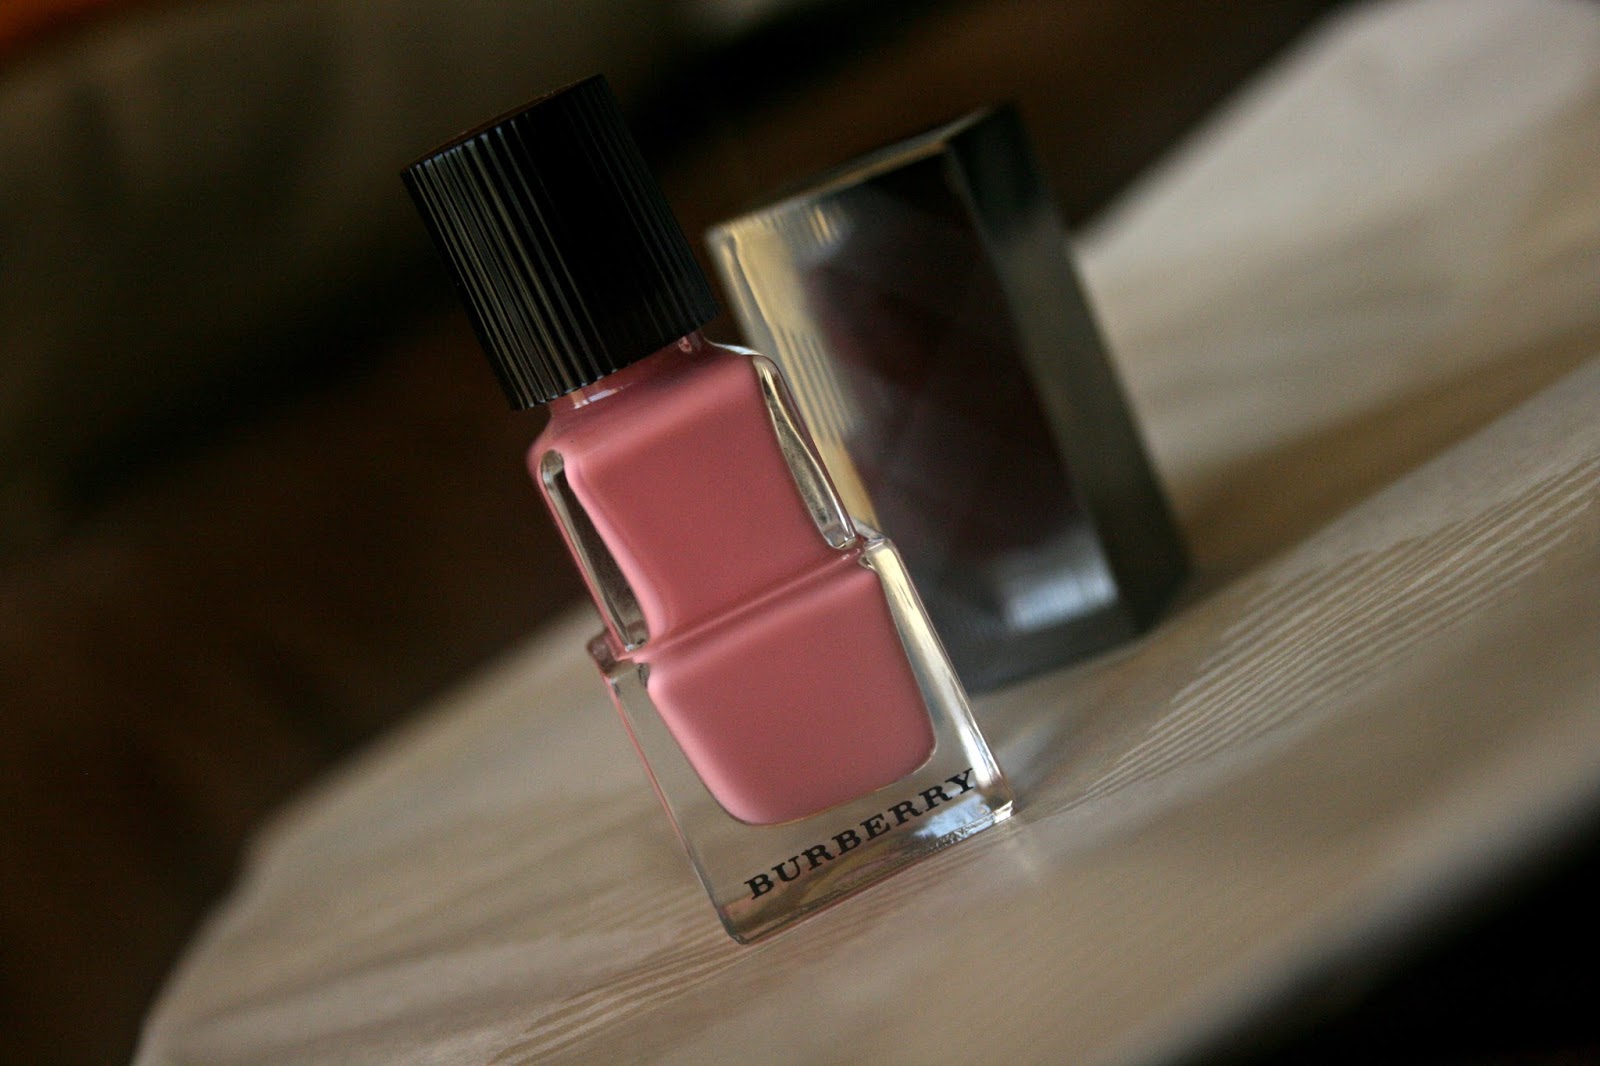 Burberry Beauty Nail Polish in Rose Pink No. 400